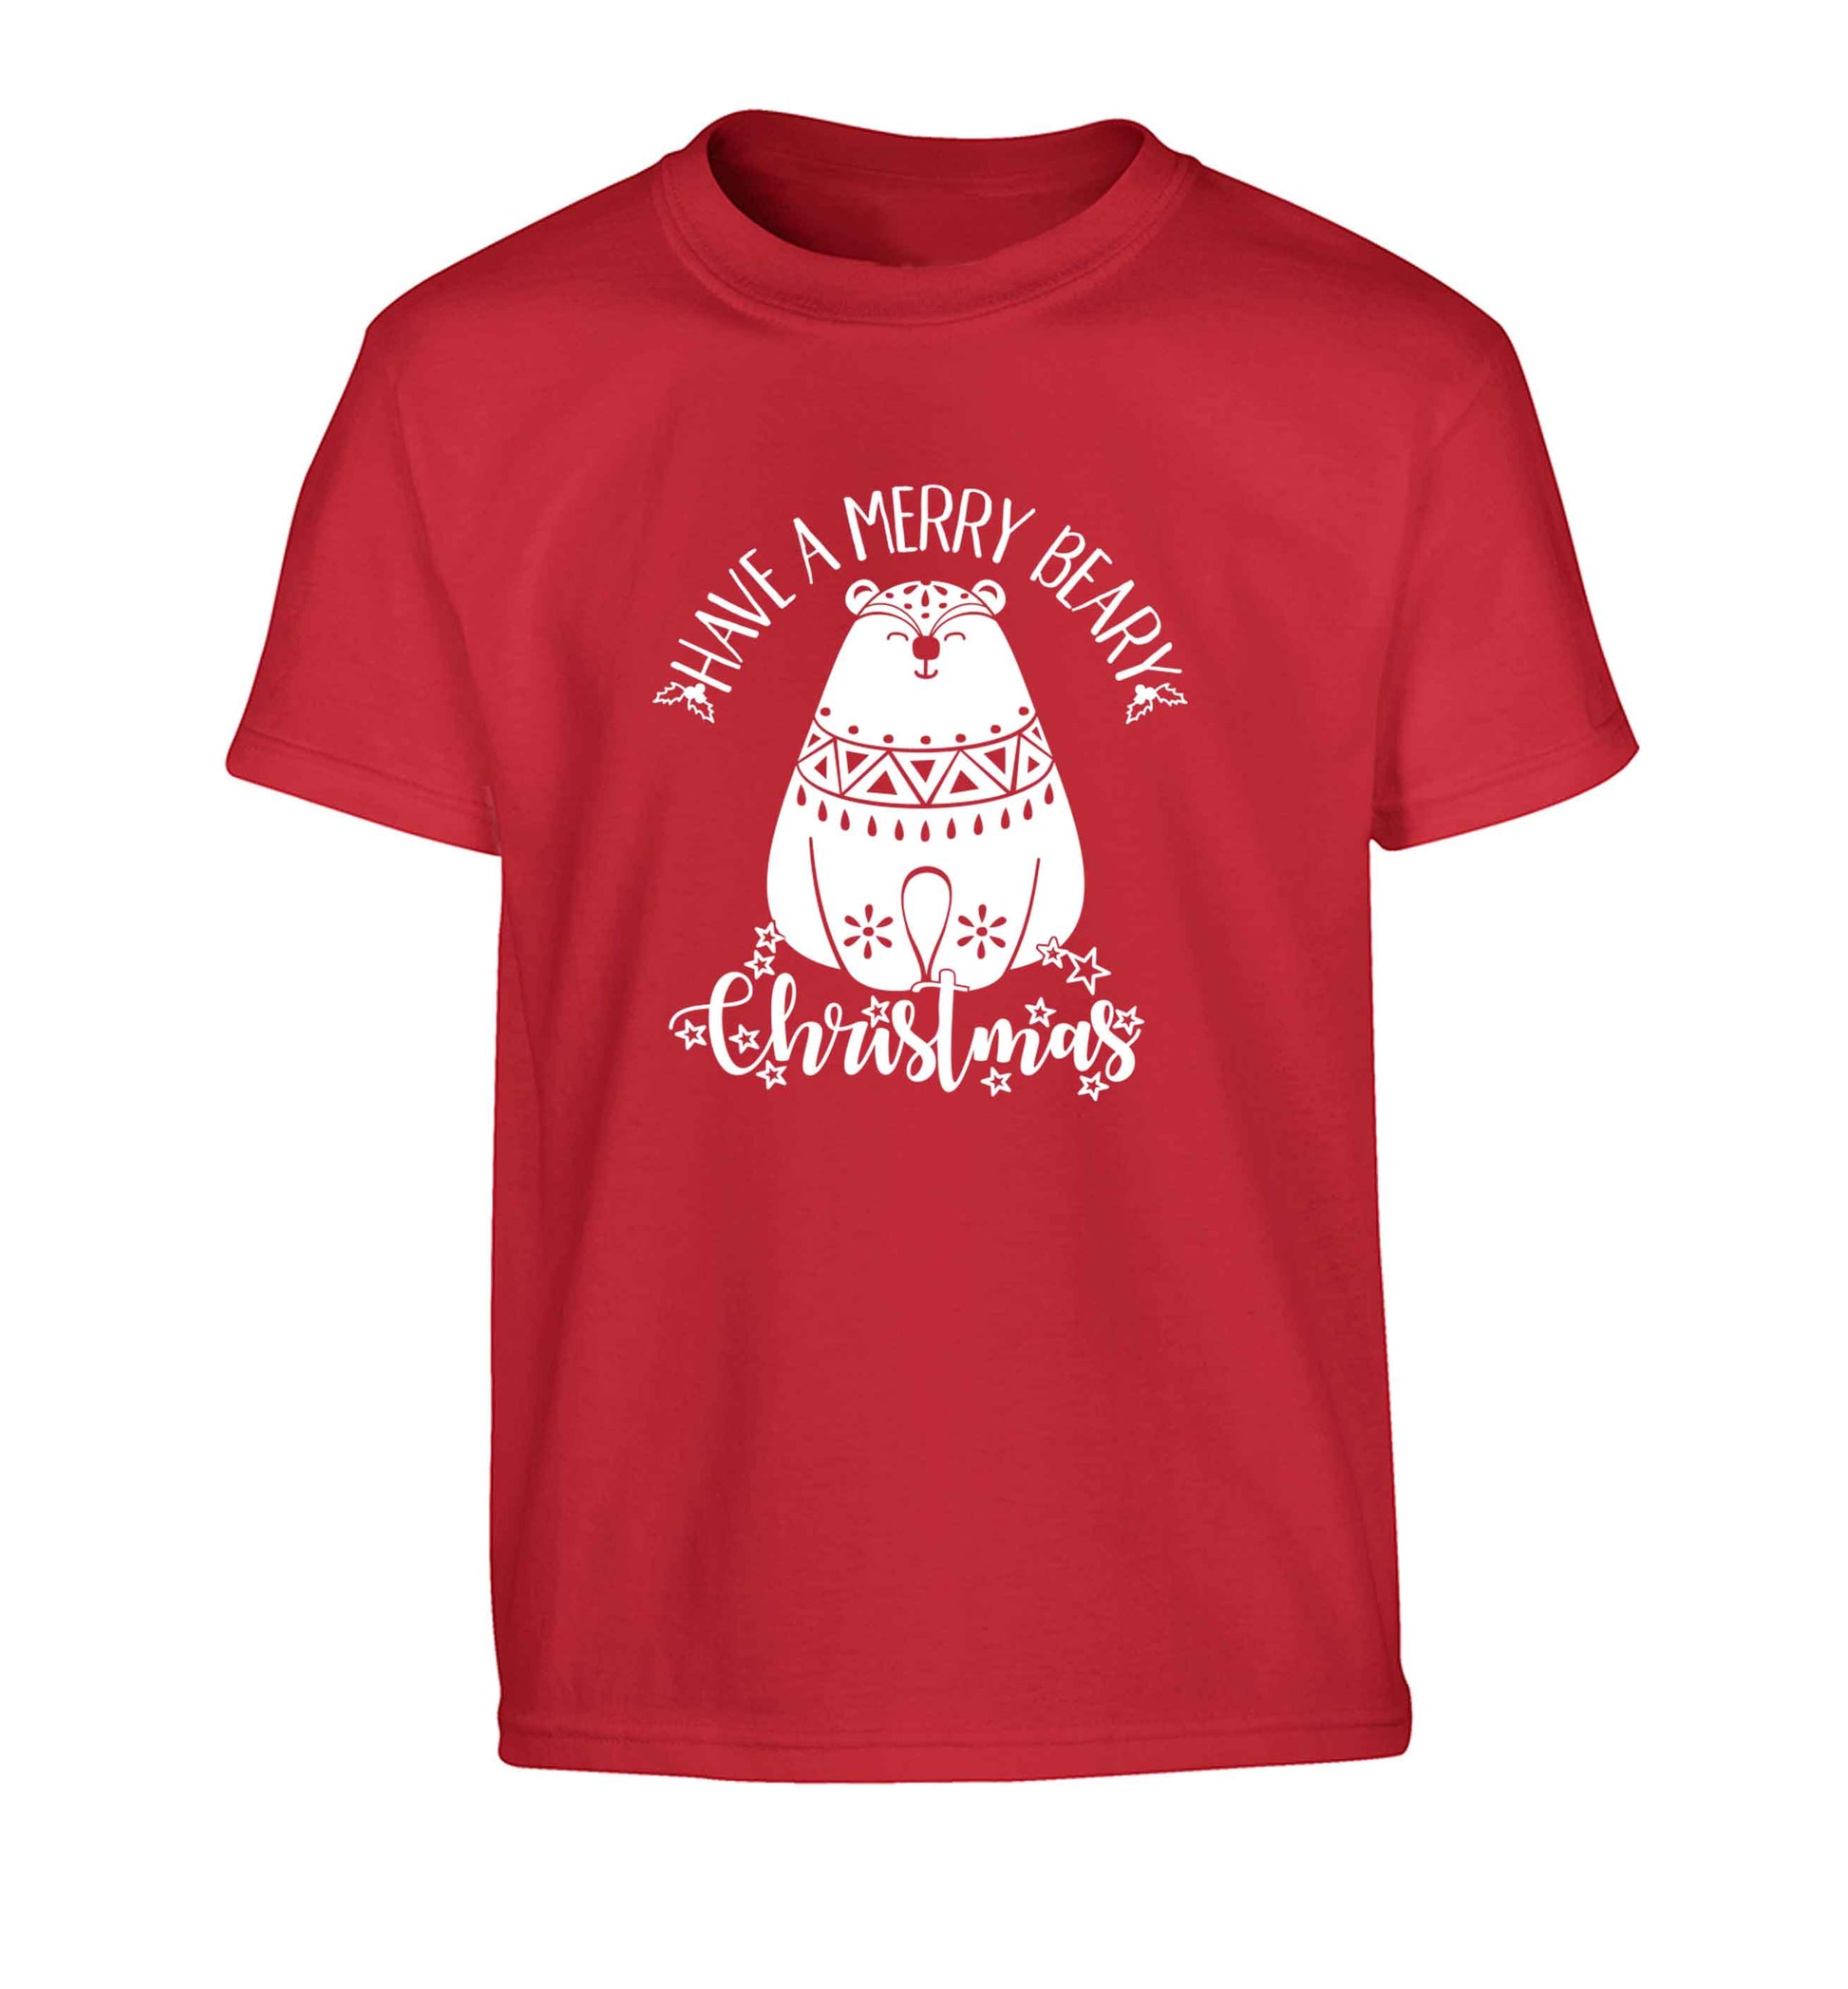 Have a merry beary Christmas Children's red Tshirt 12-13 Years